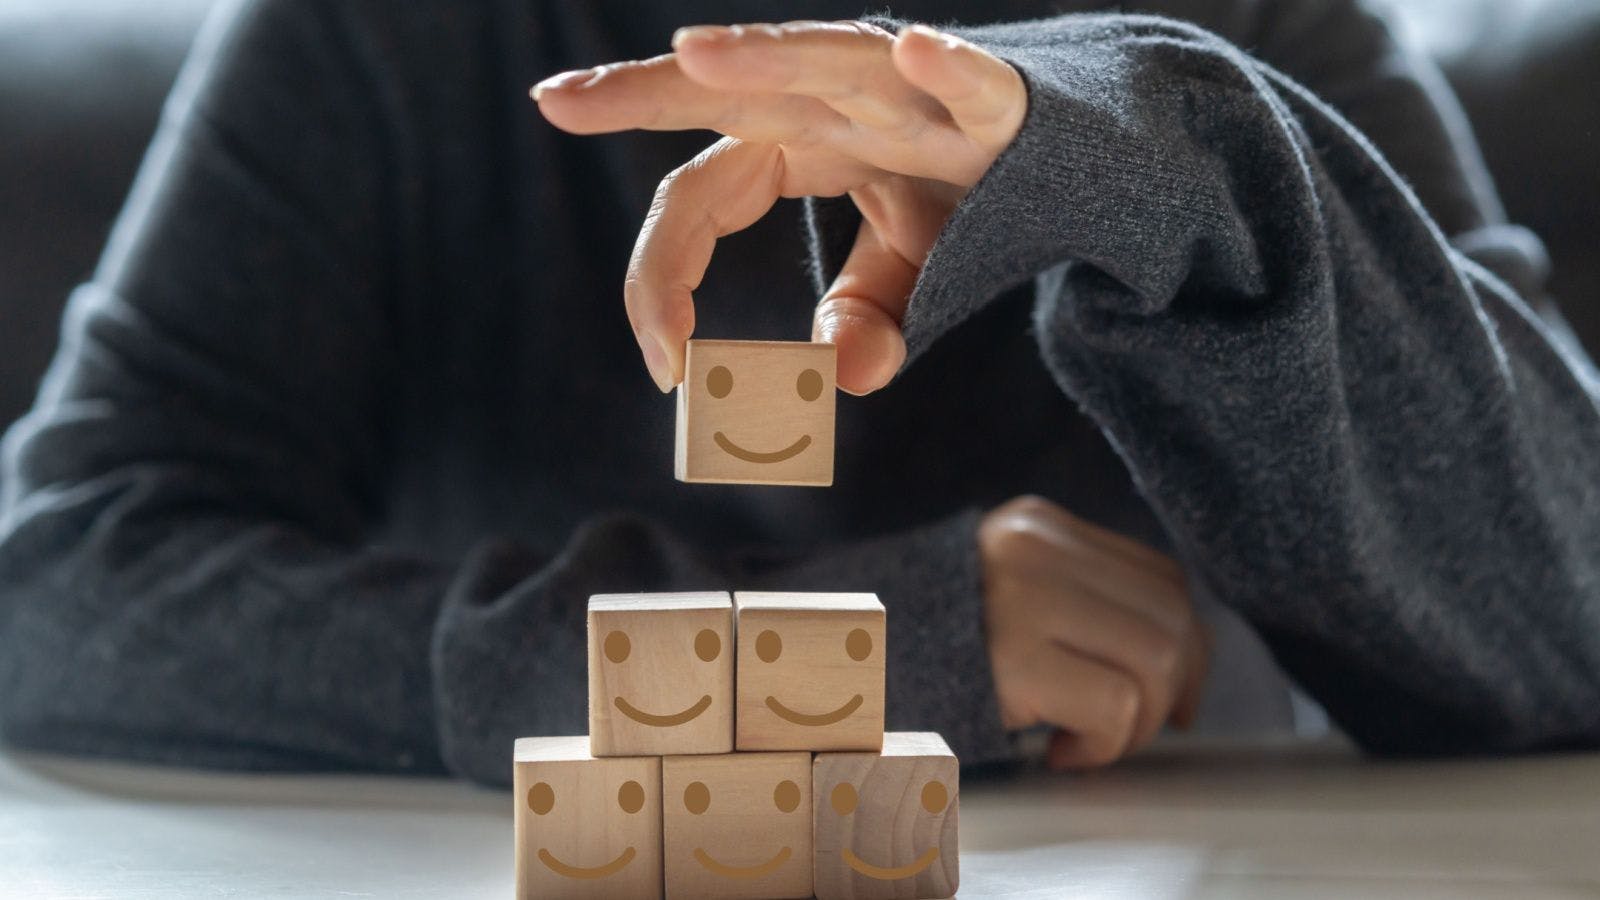 a stack of blocks with smiley faces indicating wellbeing